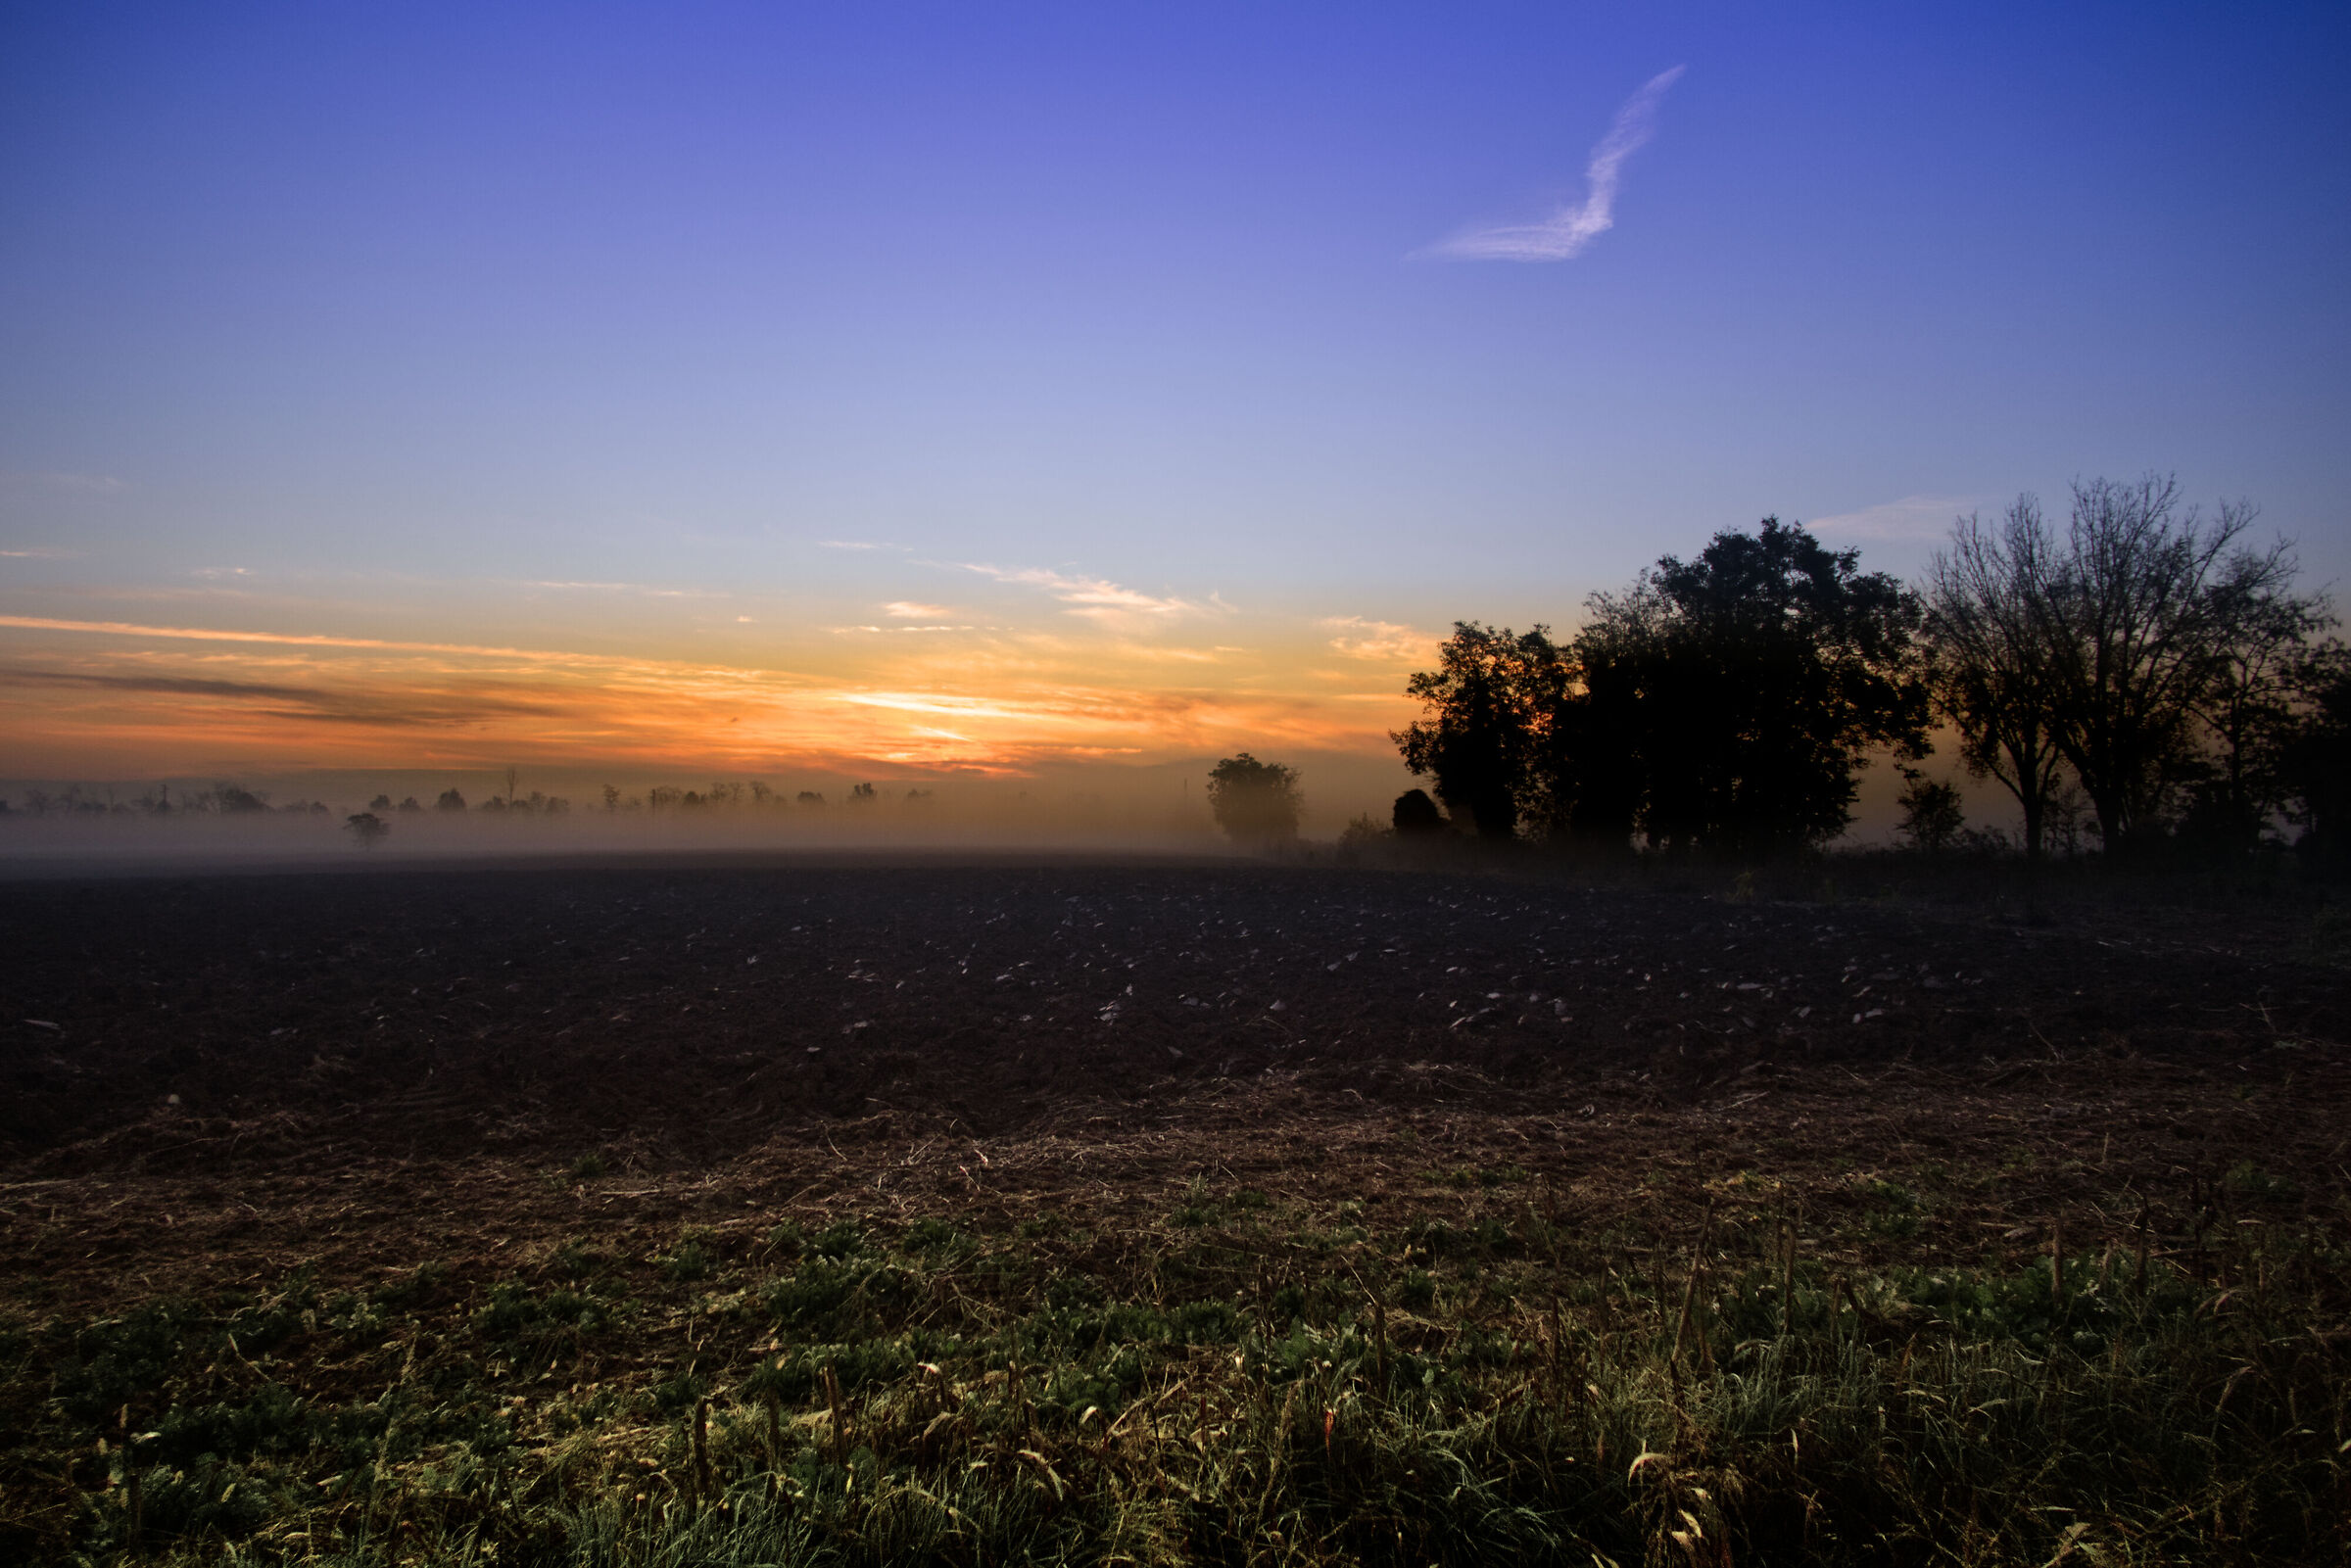 Sunrise in the countryside...